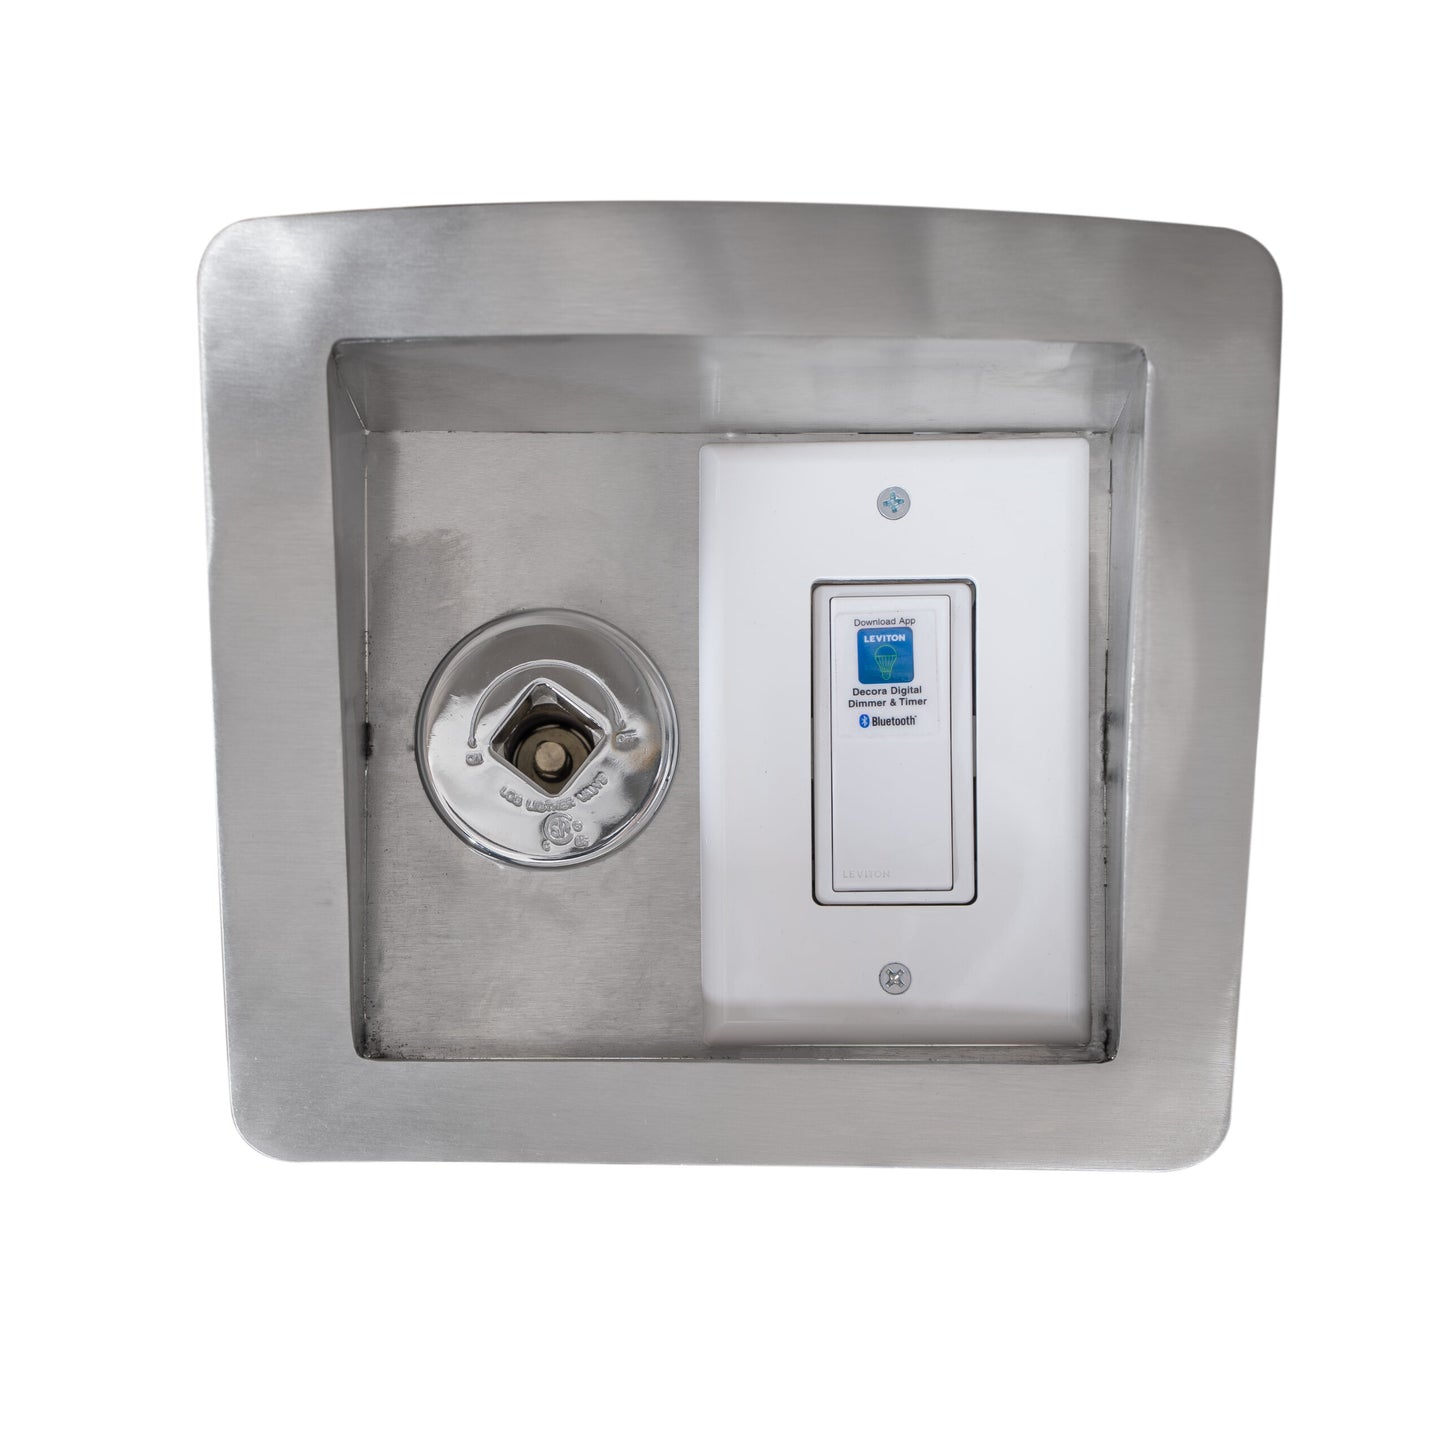 Bluetooth Panel (Smart Switch) with Key Valve - Recessed Panel